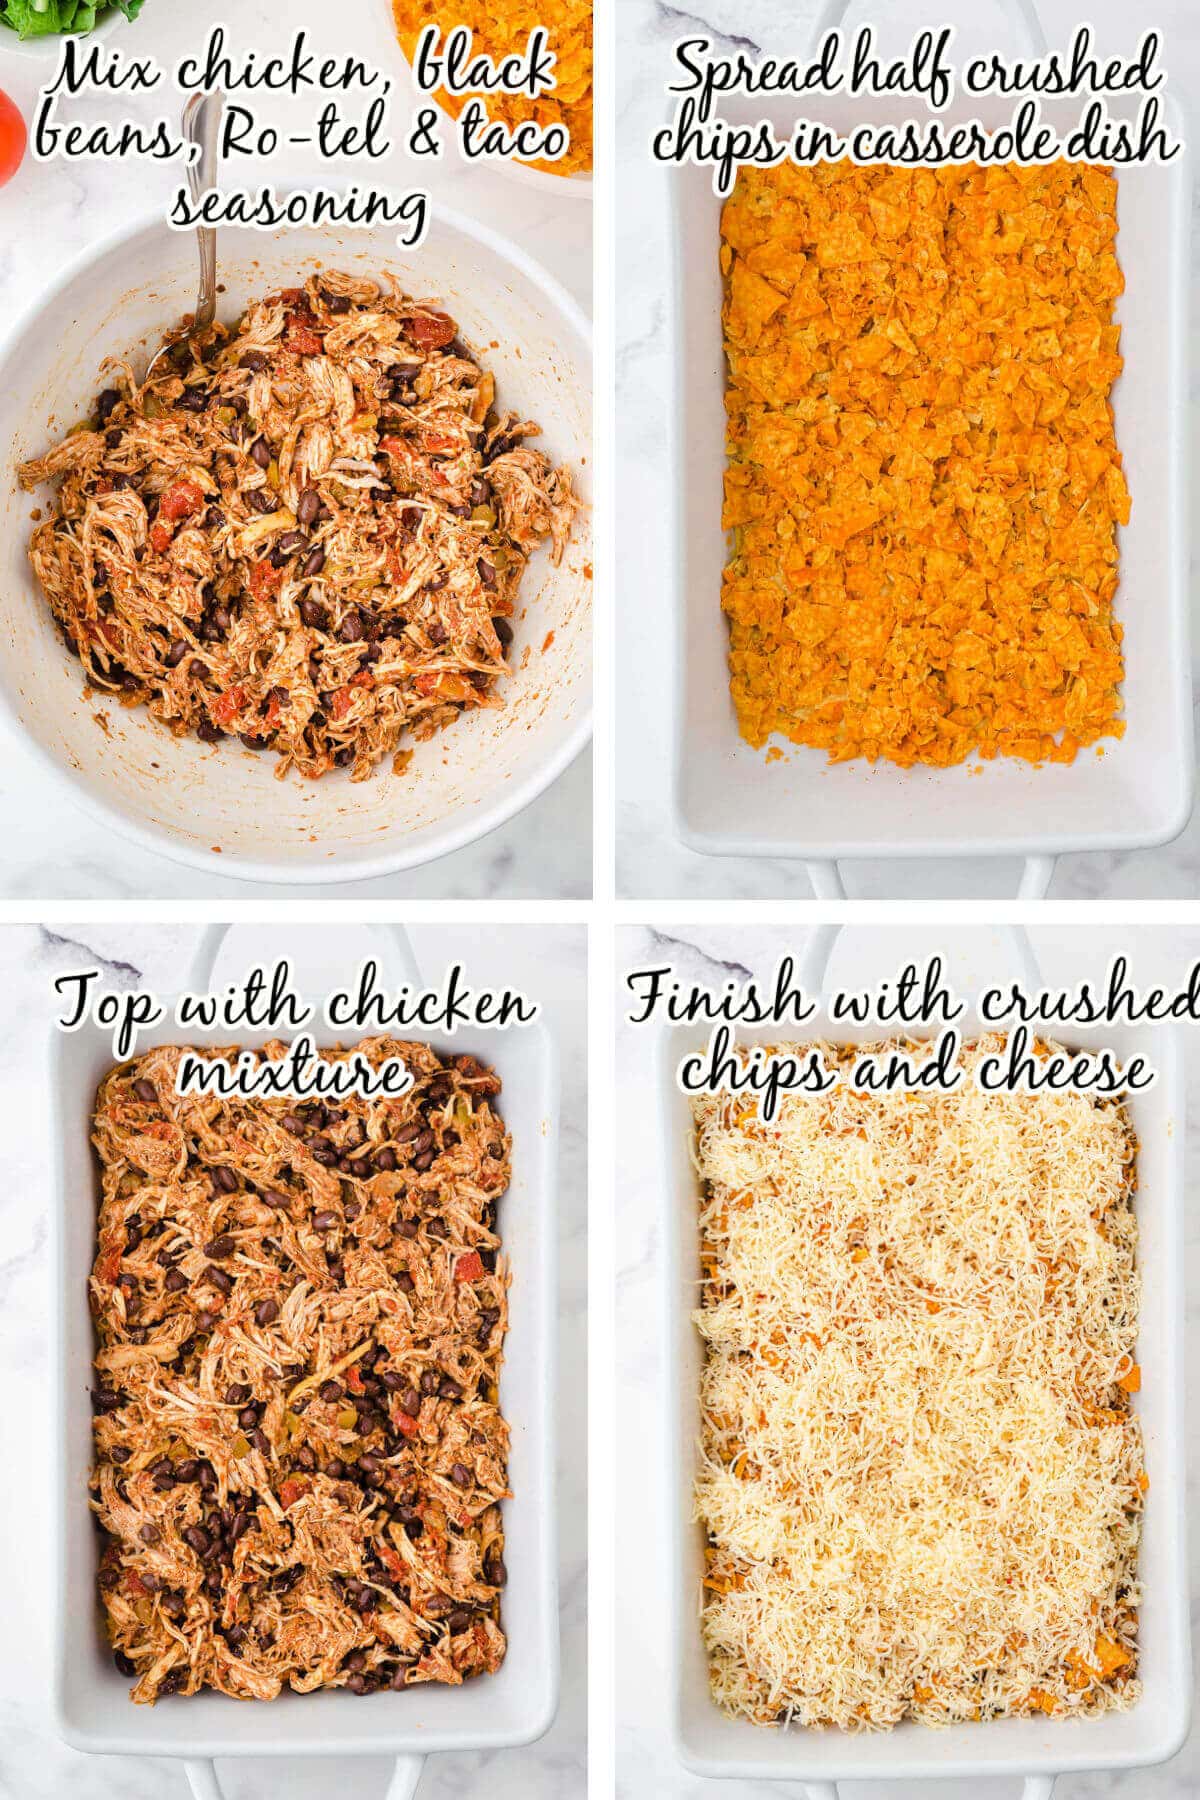 Step by step instructions to make casserole dish. With print overlay. 